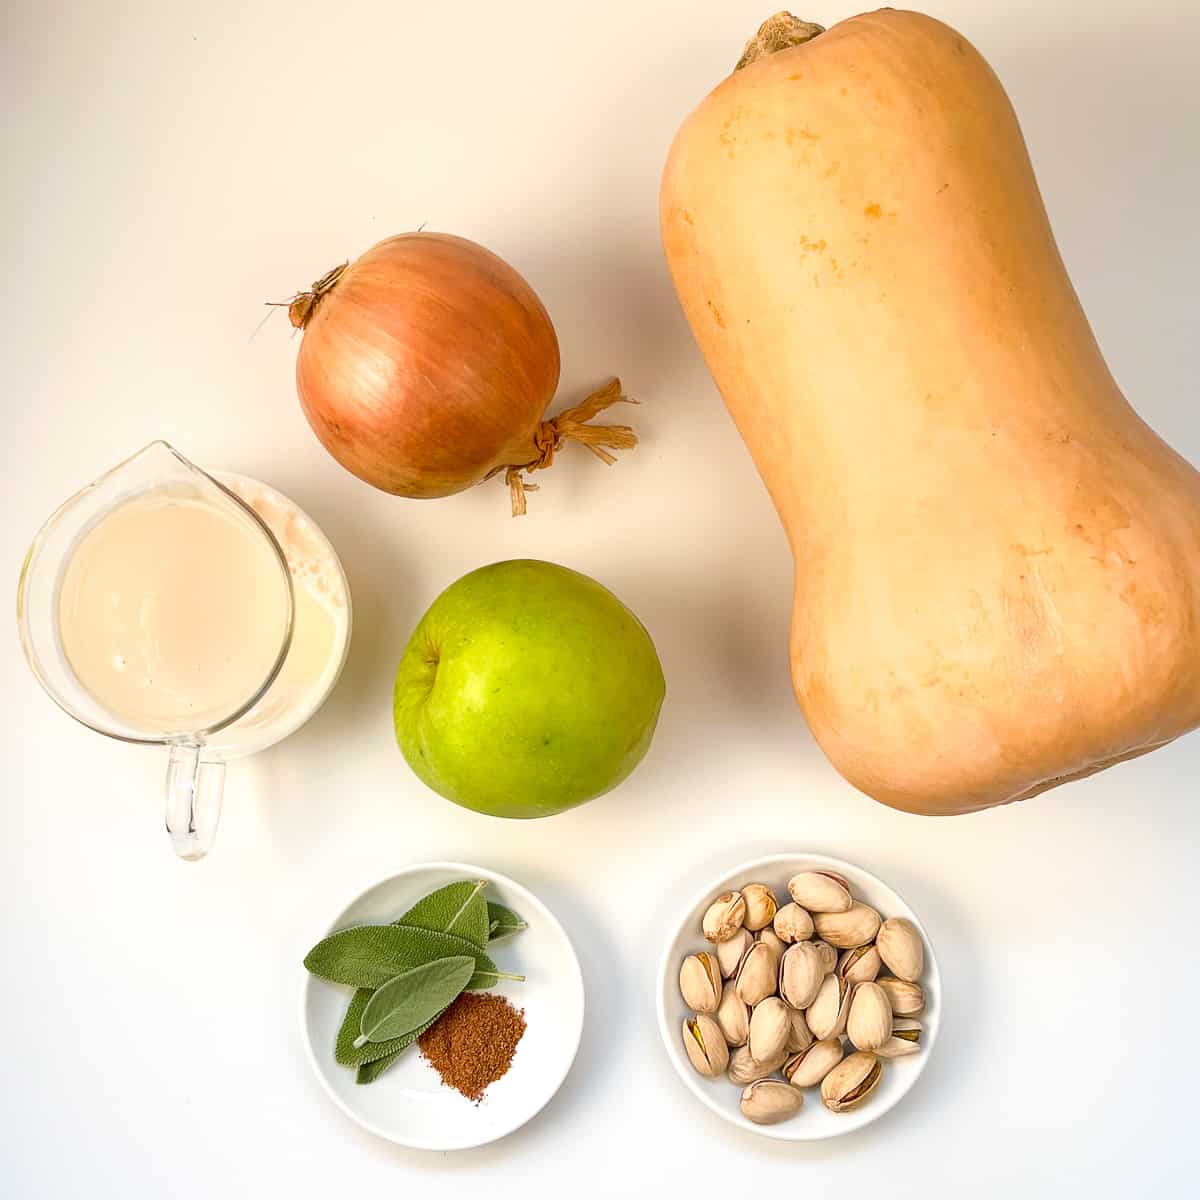 top view of ingredients for butternut squash soup: butternut squash, onion, green apple, soymilk, ground nutmeg, fresh sage leaves and pistachios